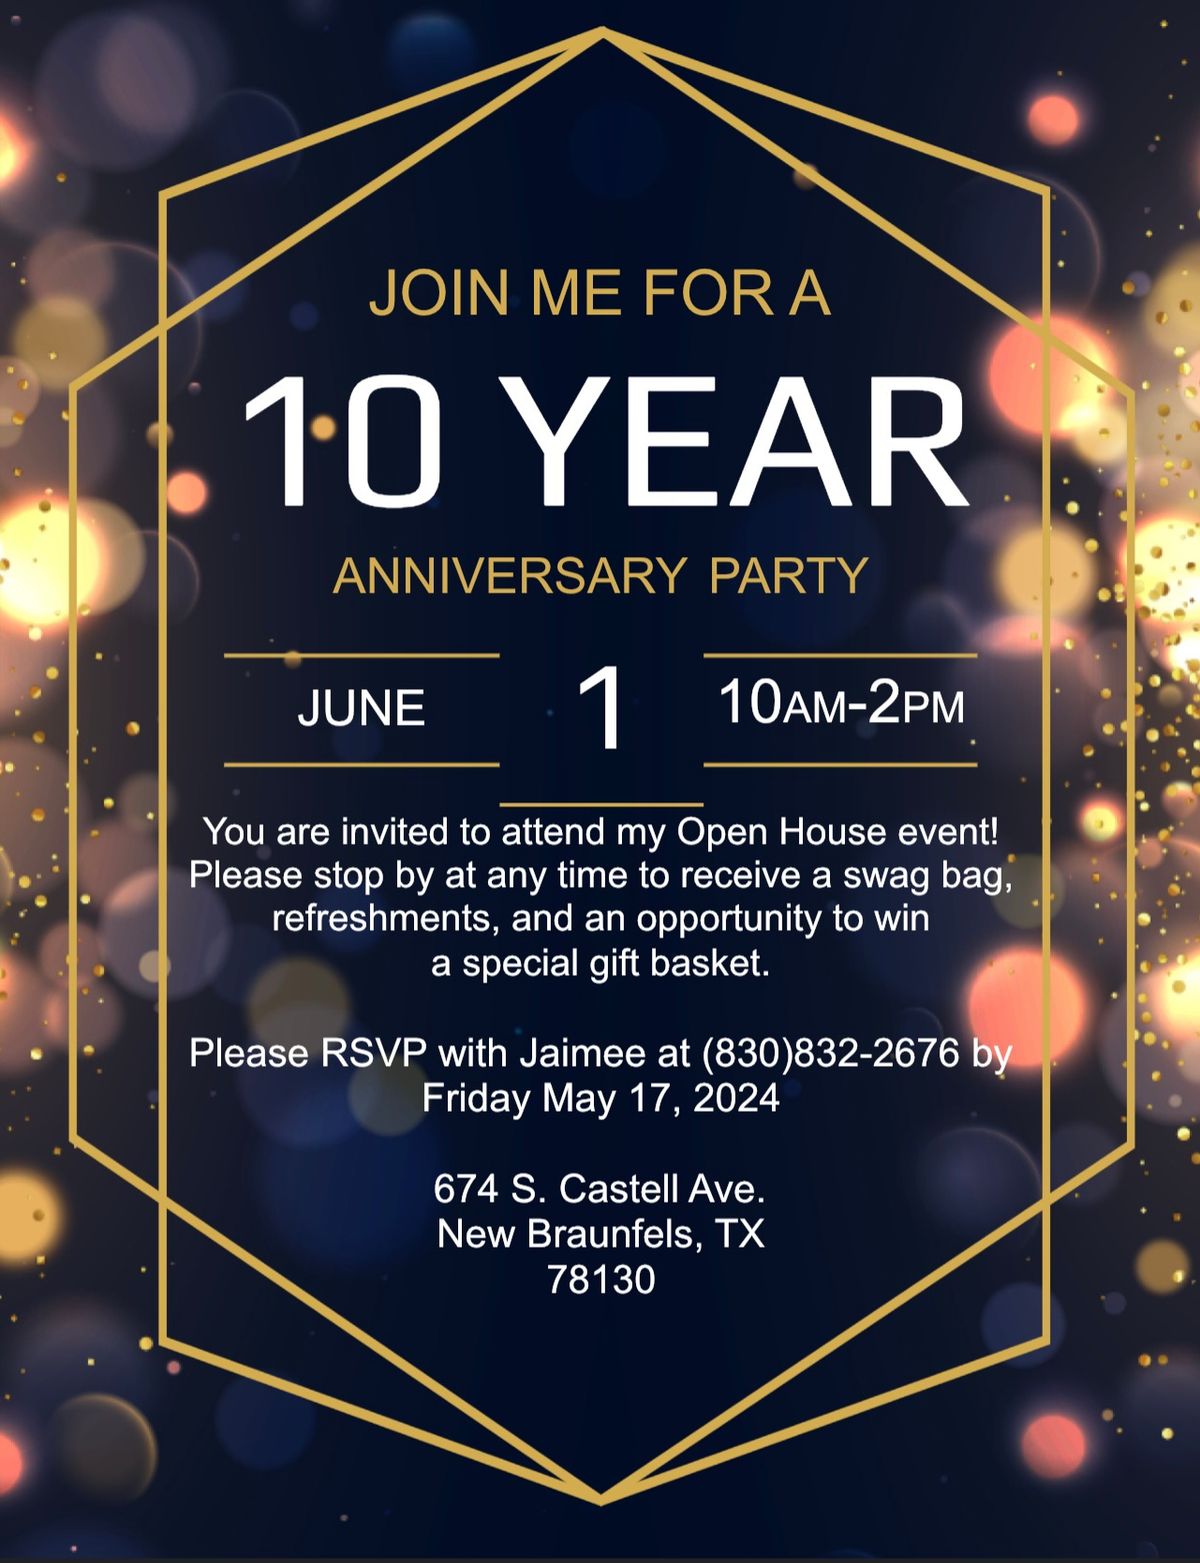 10 YEAR ANNIVERSARY PARTY!!!